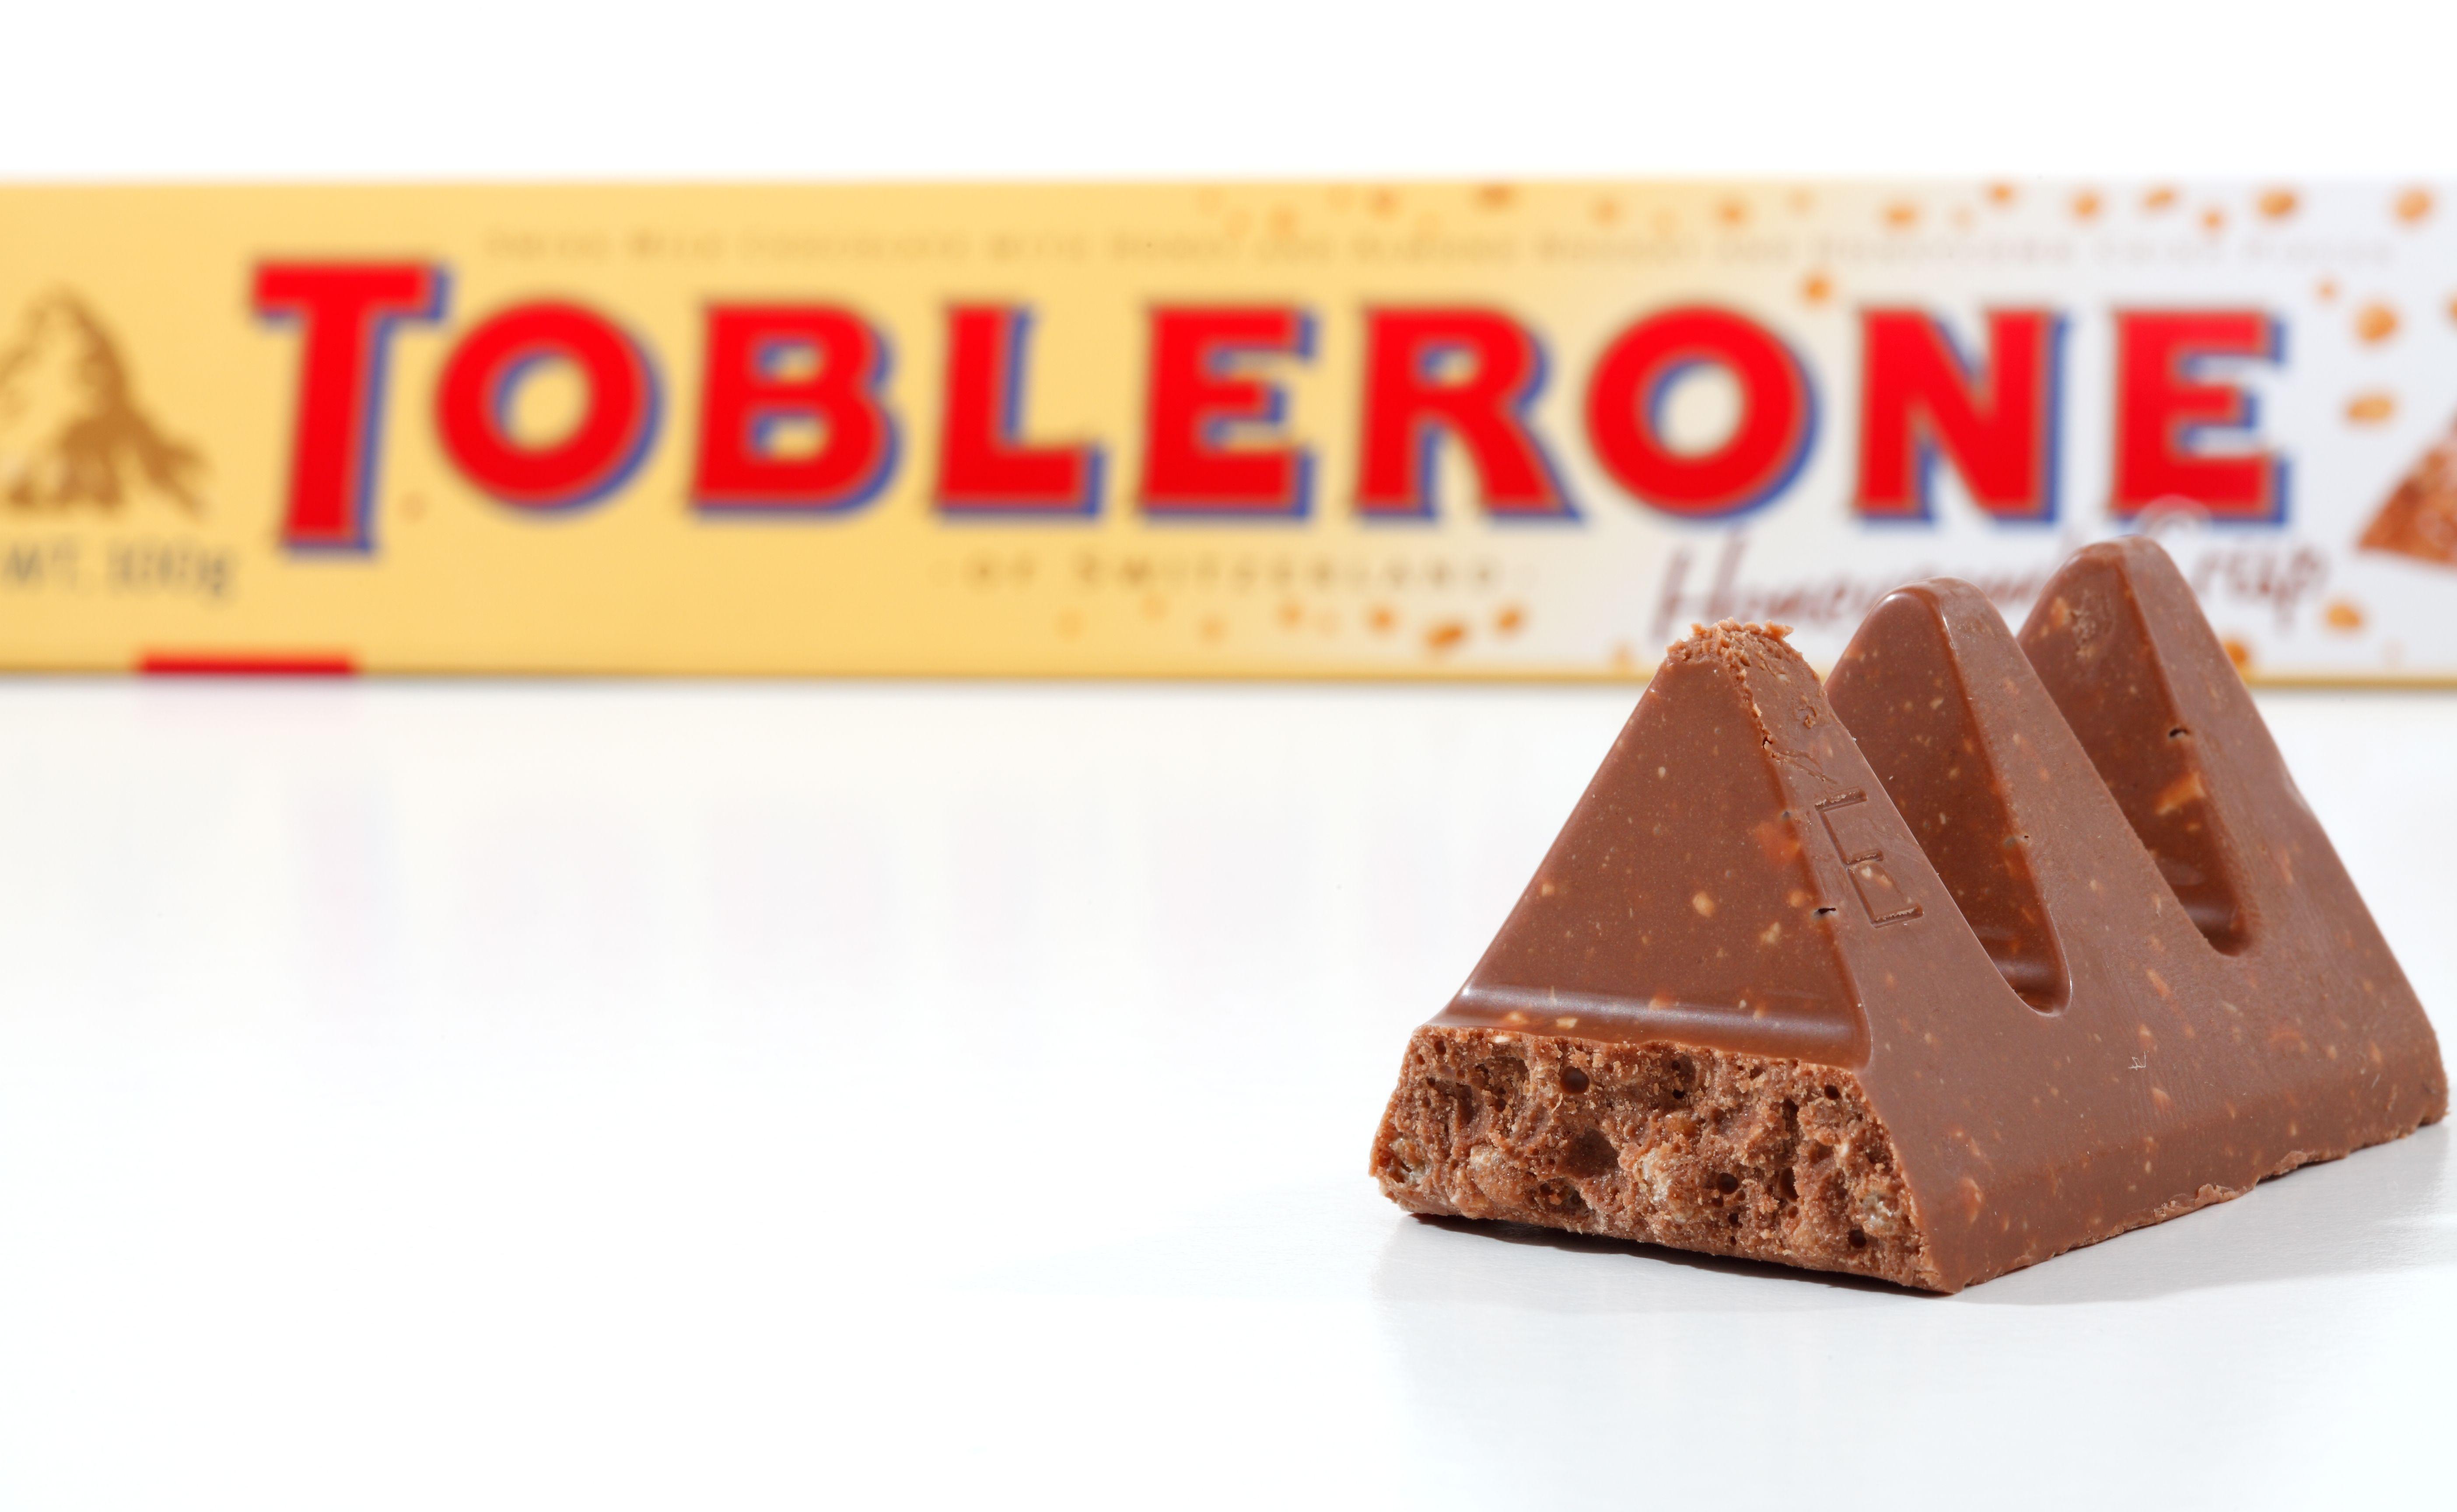 Toblerone Candy Logo - Toblerone Chocolate Is Changing Shape, Fans Blame Brexit